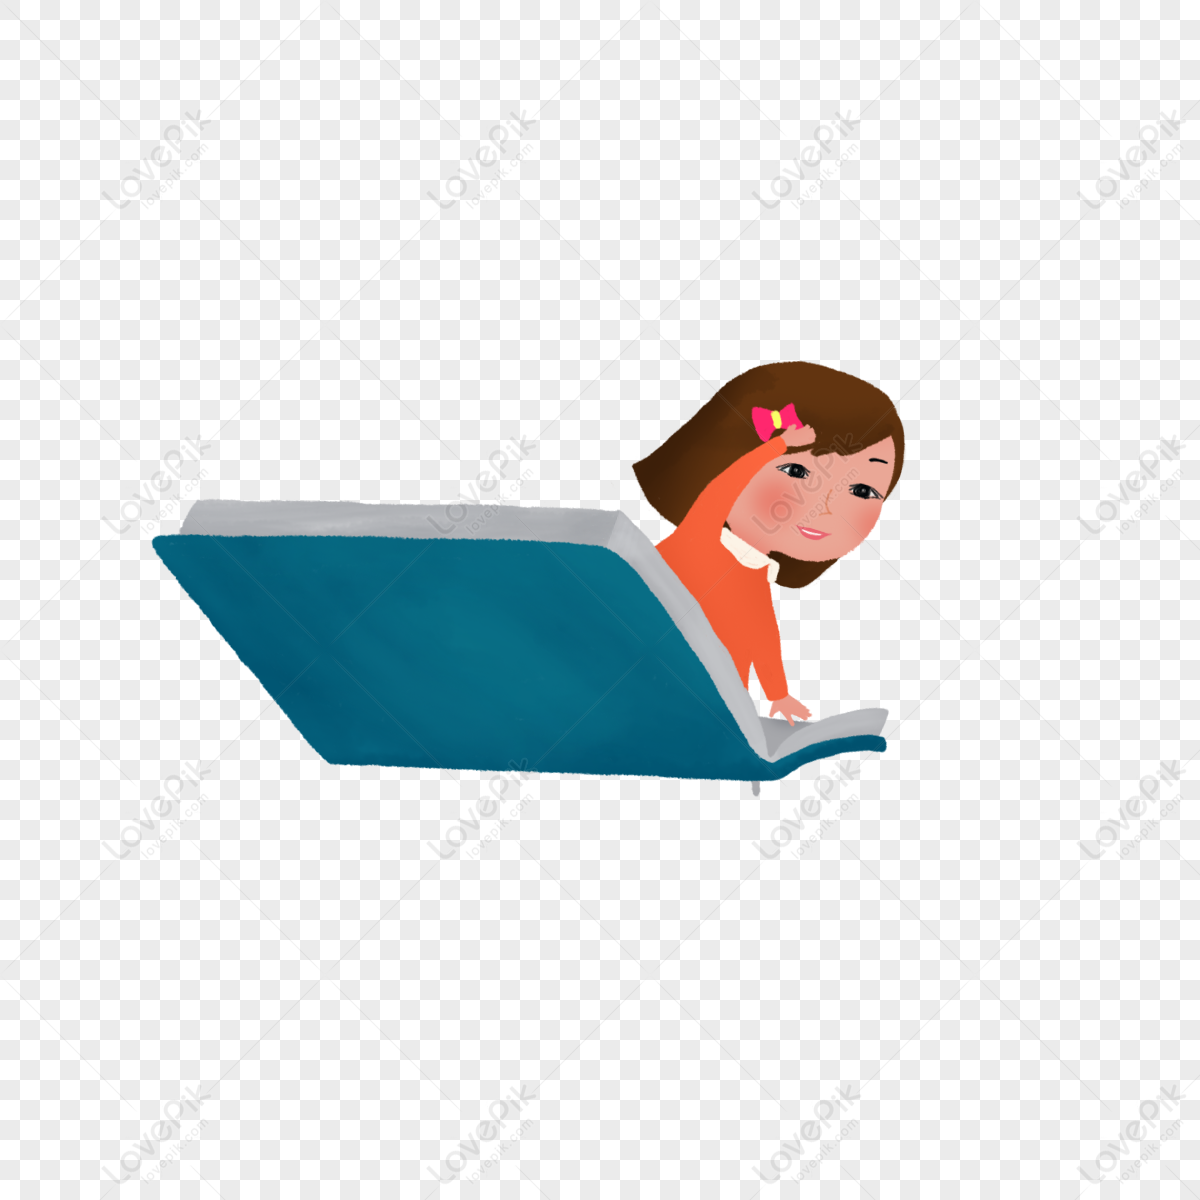 A Girl In A Book PNG Image And Clipart Image For Free Download - Lovepik |  400173478